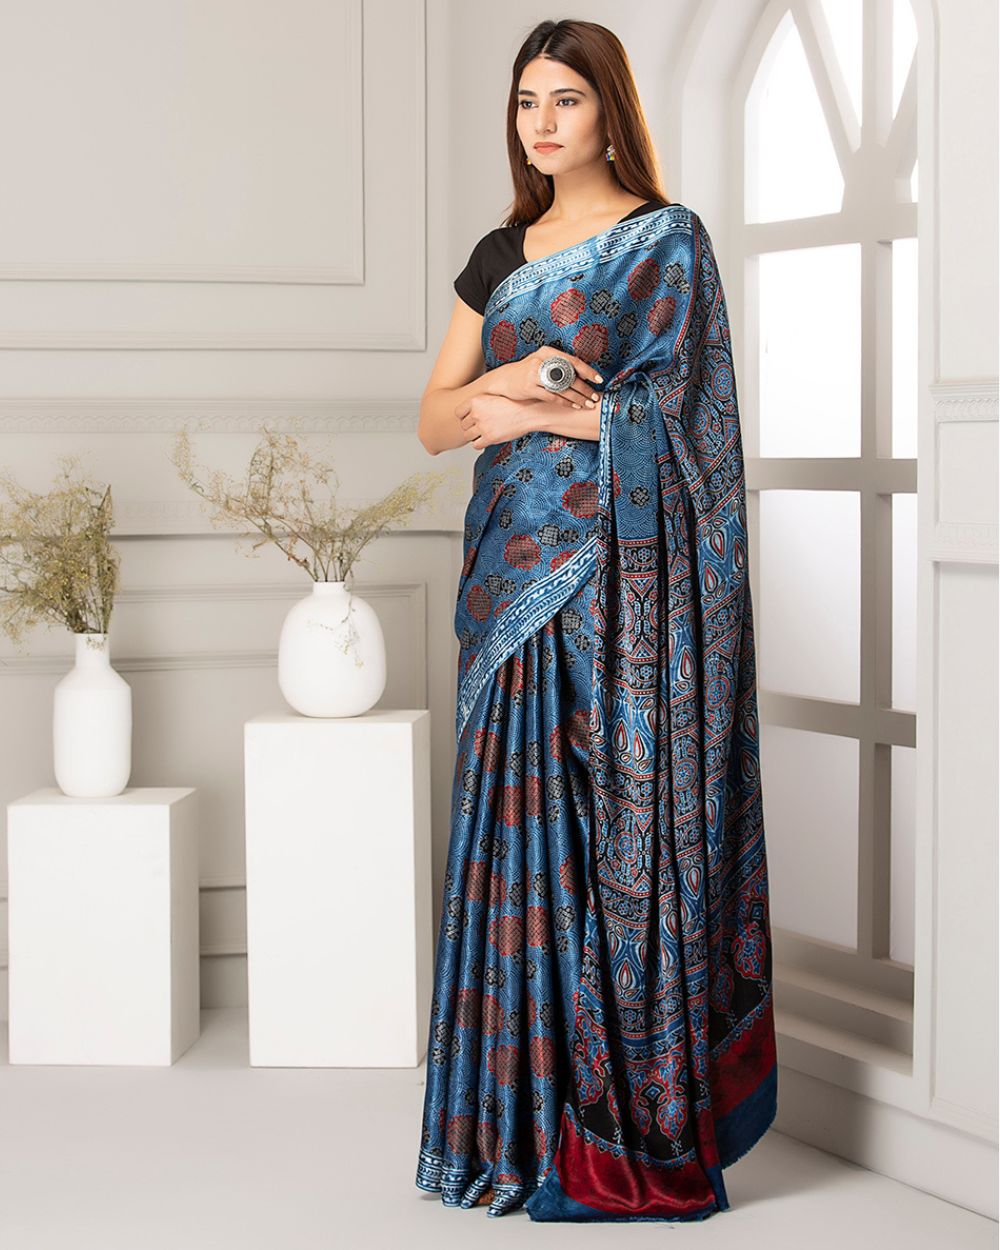 Buy saree under 400 rupees in India @ Limeroad